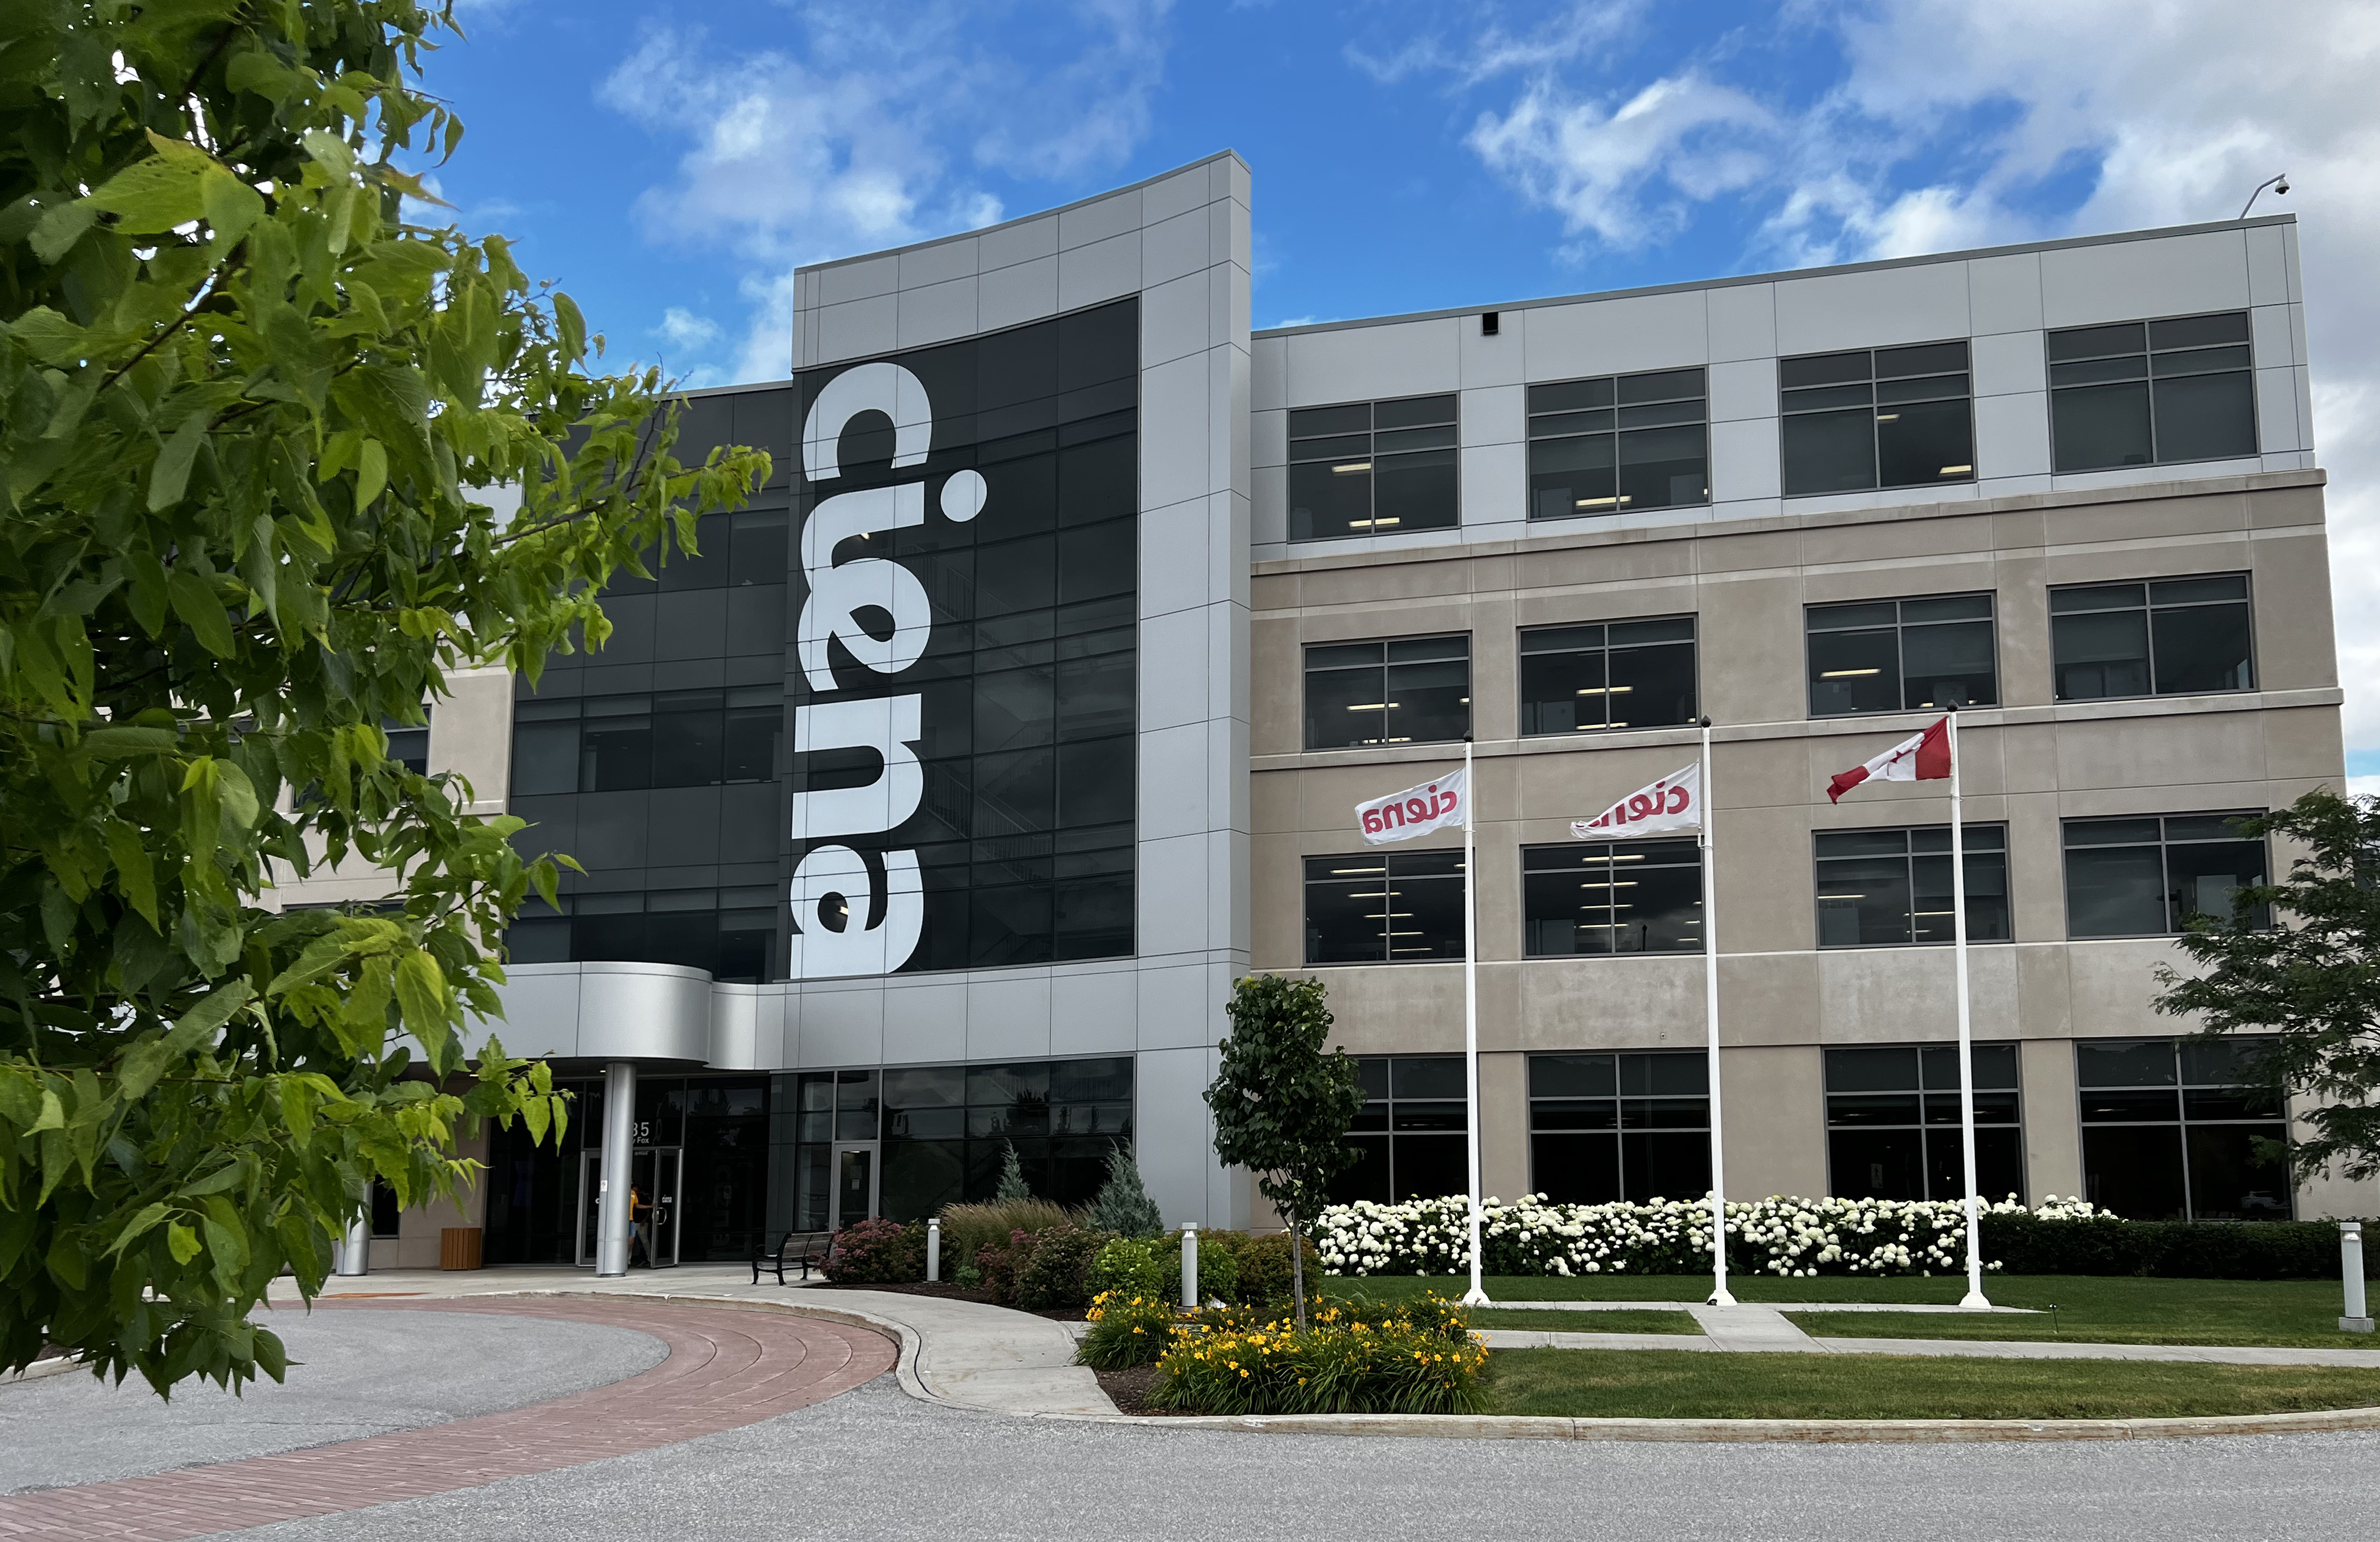 the outside of ciena's office building in ottowa